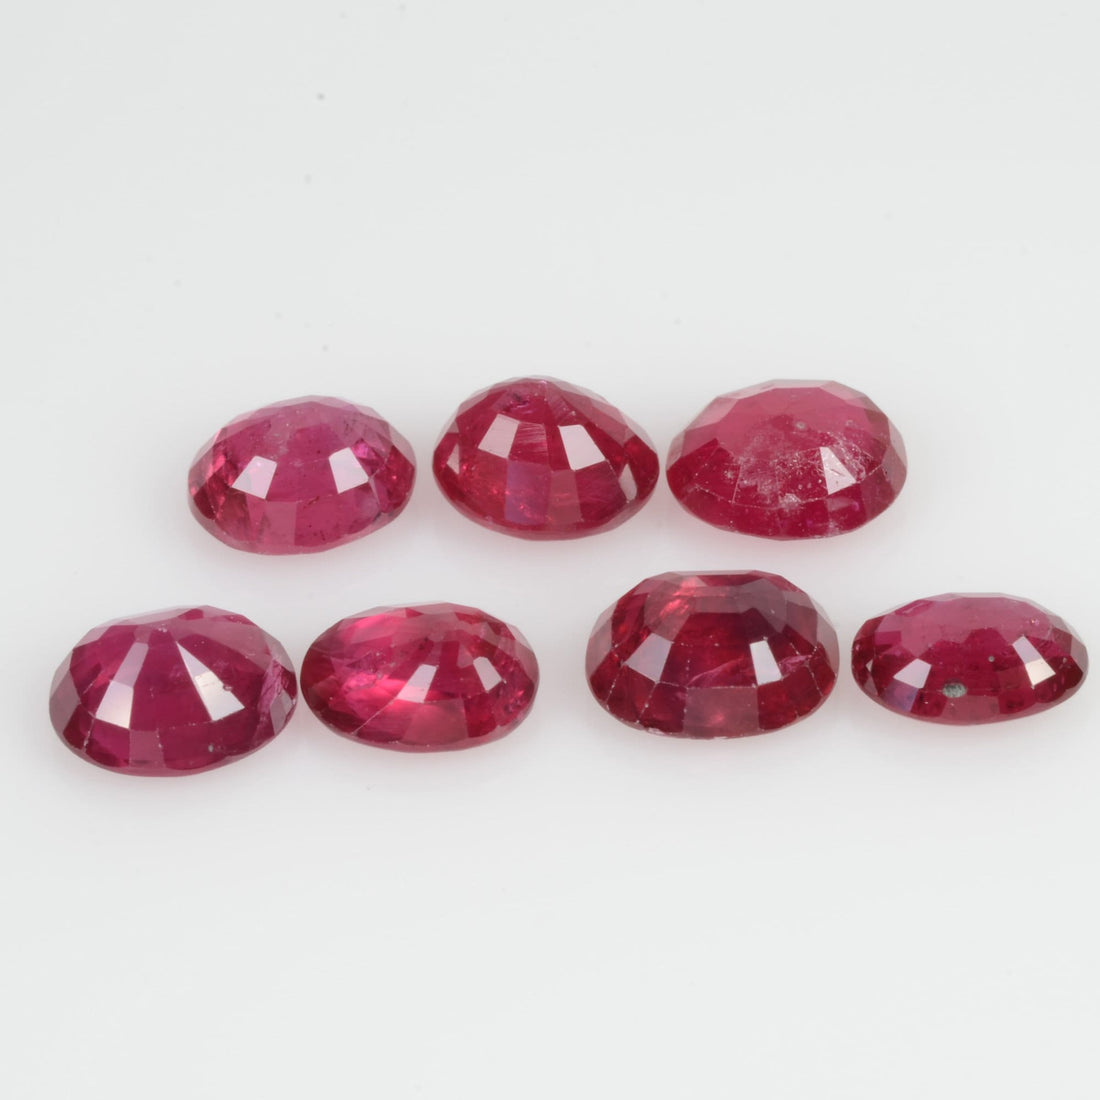 6X5 mm Natural Arican Ruby Loose Gemstone Oval Cut